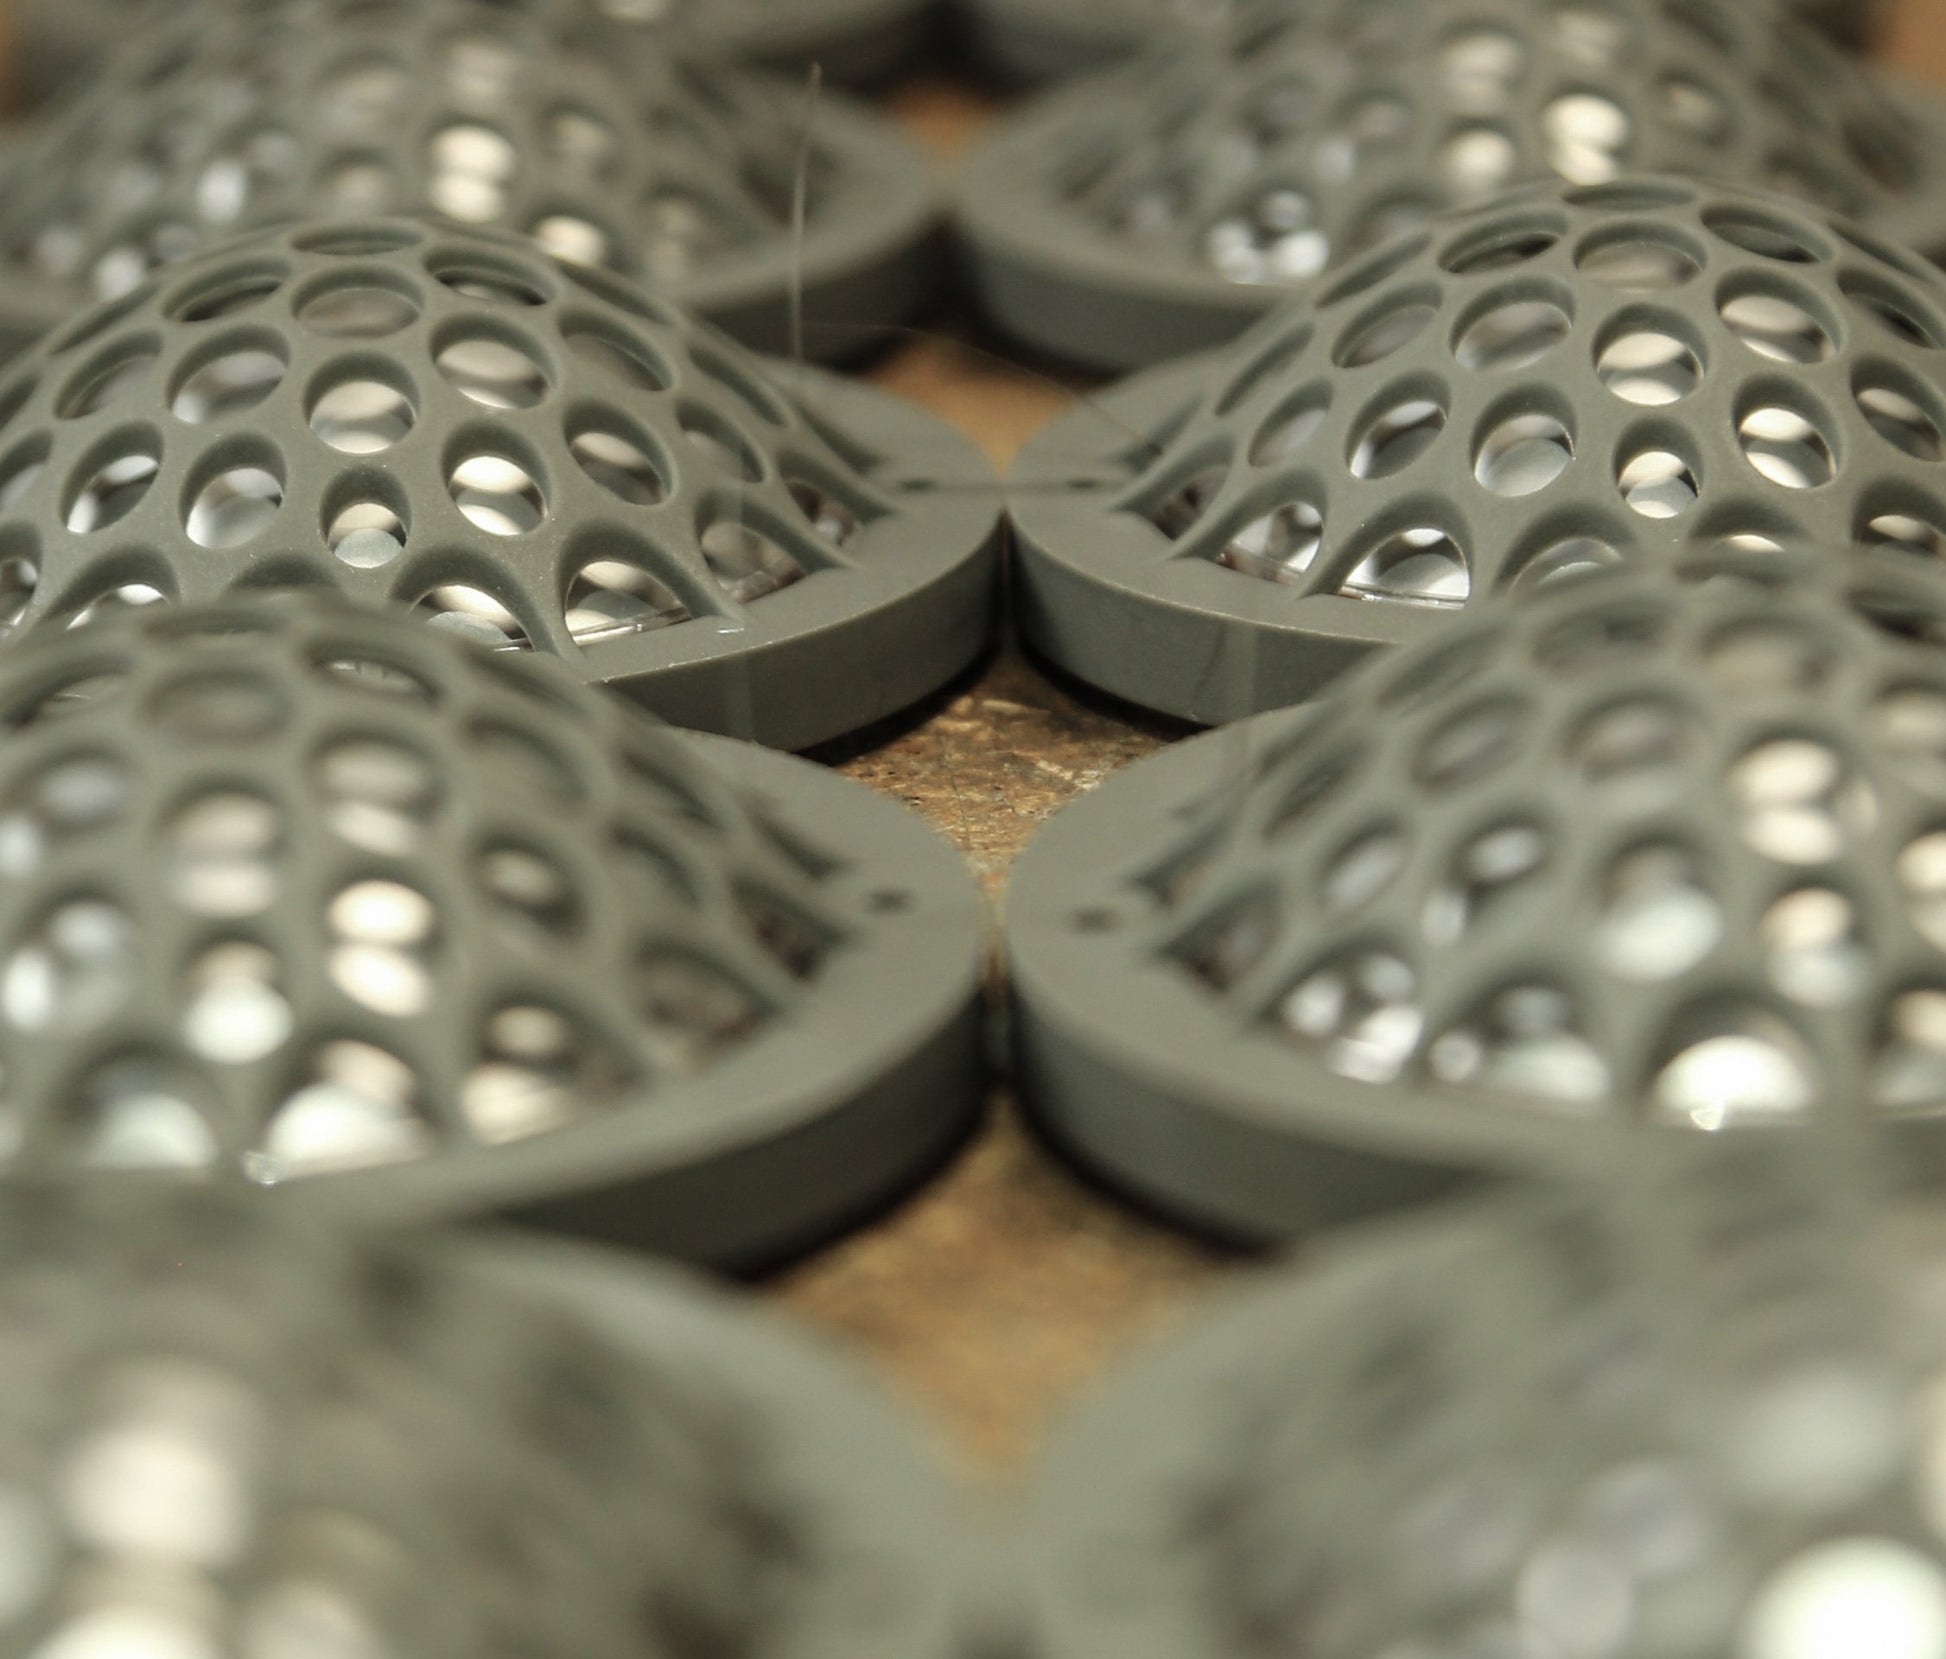 Close up of Oval B1 tweeters in production